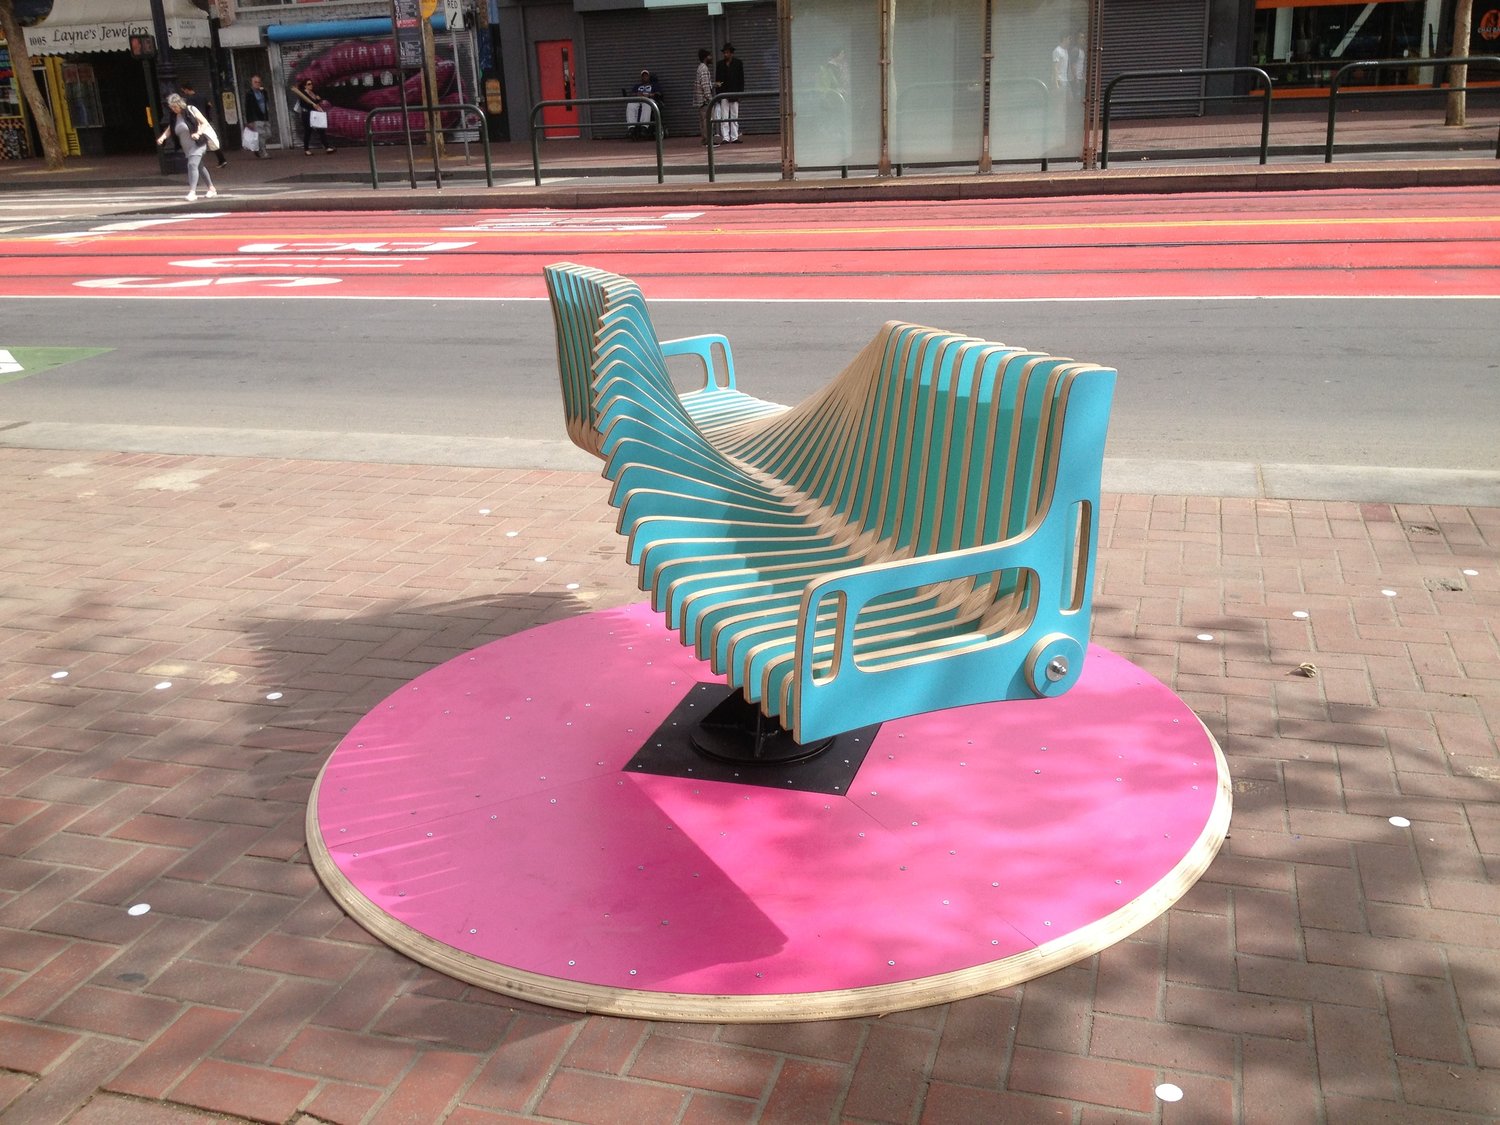  The Bench Go Round playfully re-imagines public seating to create connection between strangers. It's the creation of George Zisiadis and Rachel McConnell in San Francisco. Photo credit - George Zisiadis. 